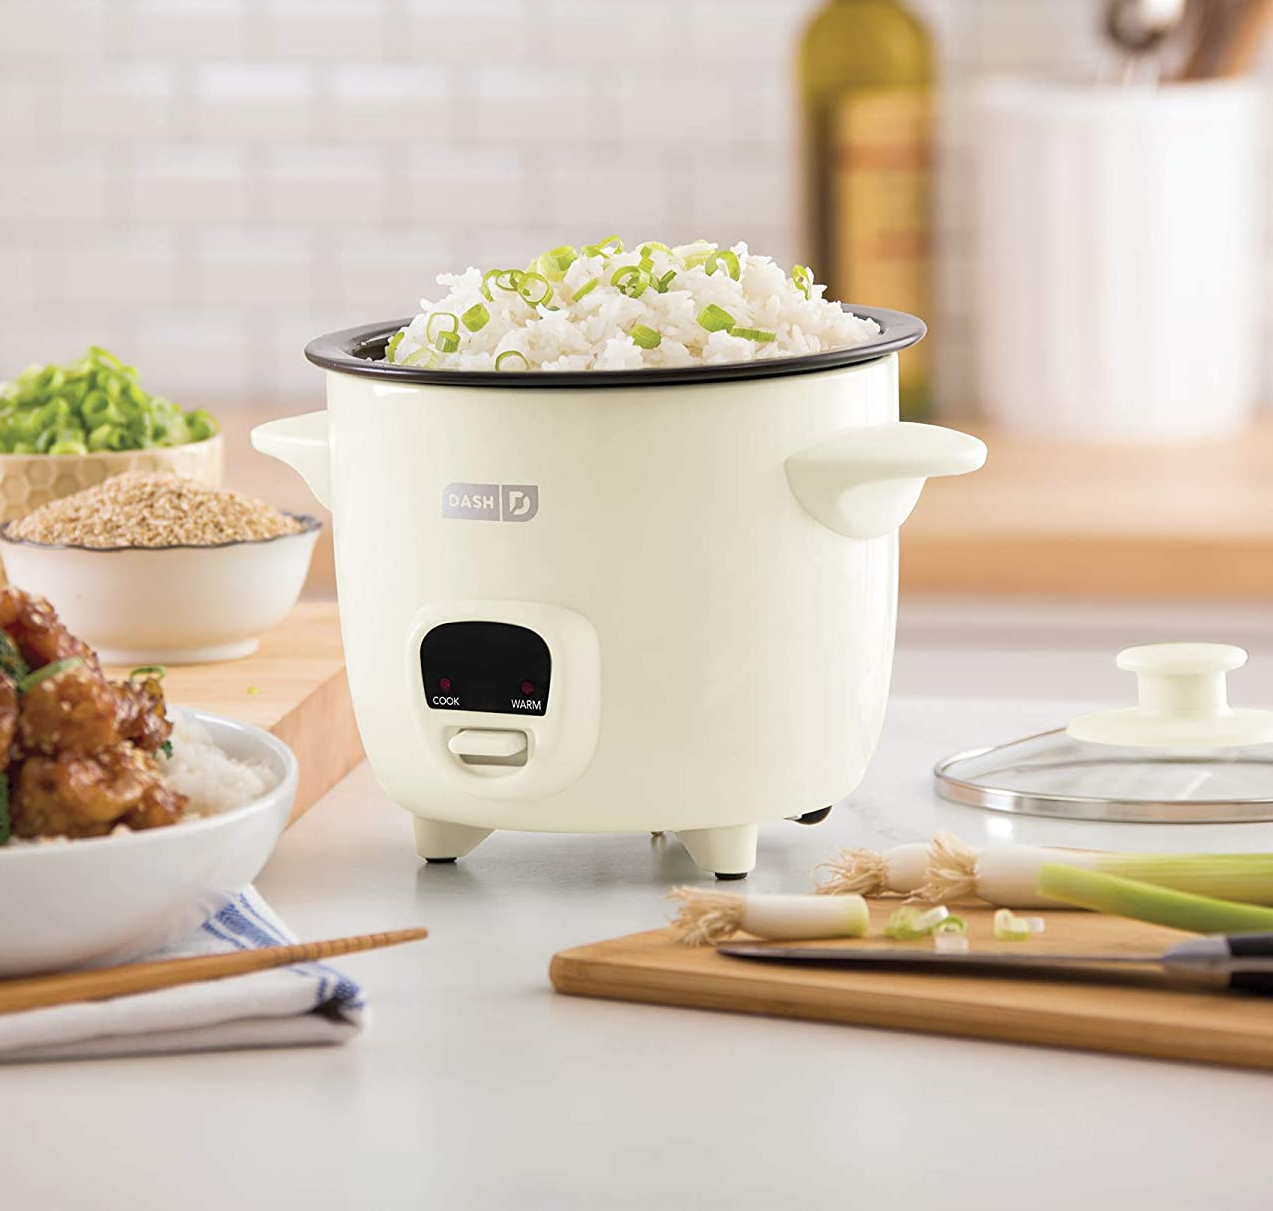 the white rice cooker filled with rice on a kitchen counter